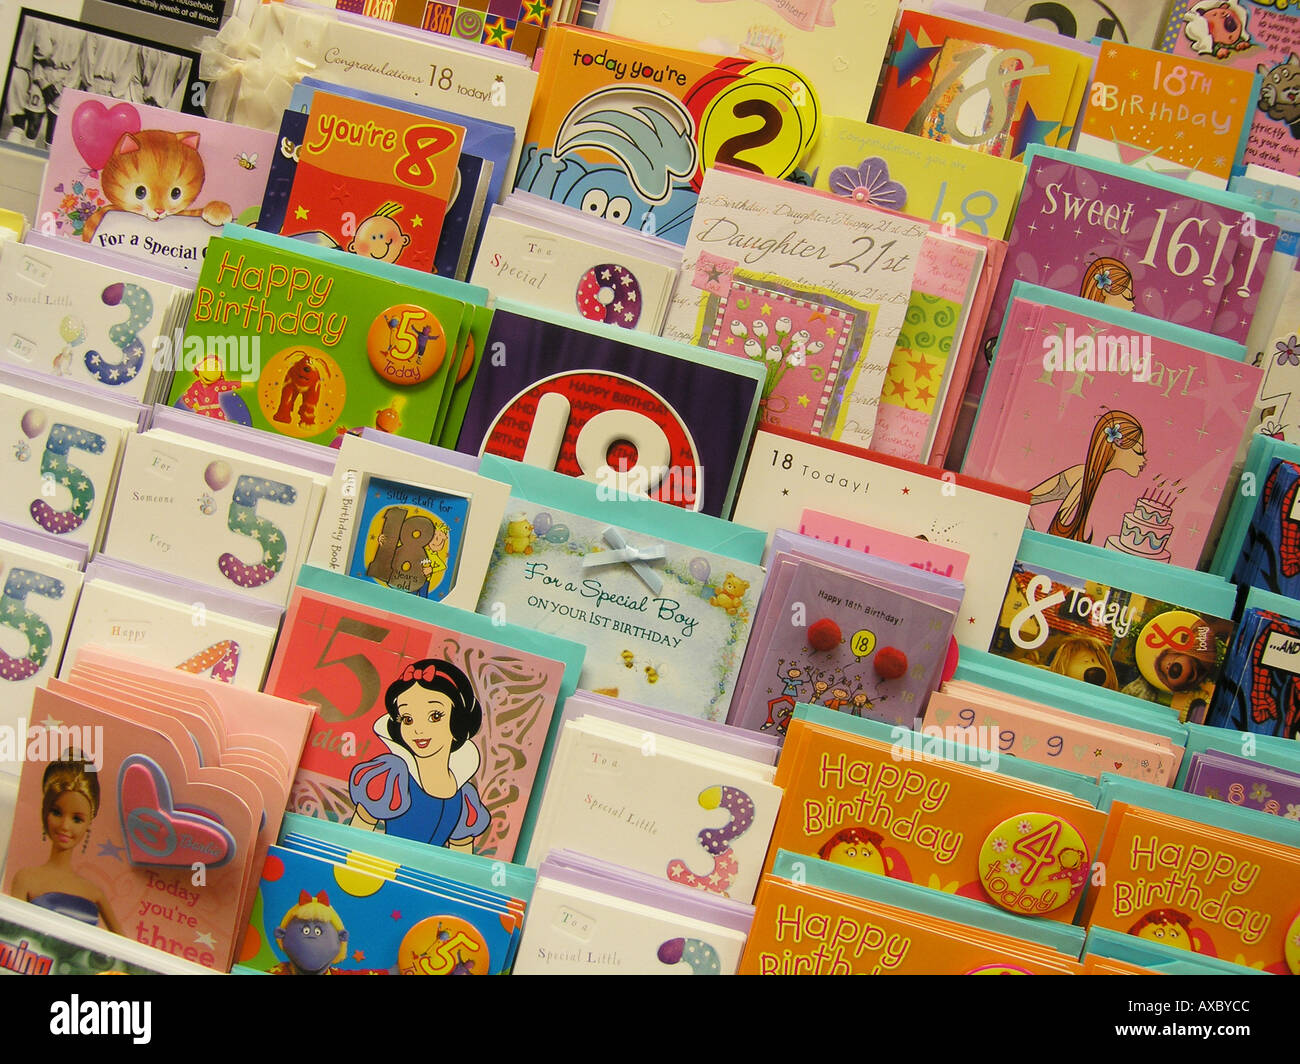 collection of birthday cards on display Stock Photo